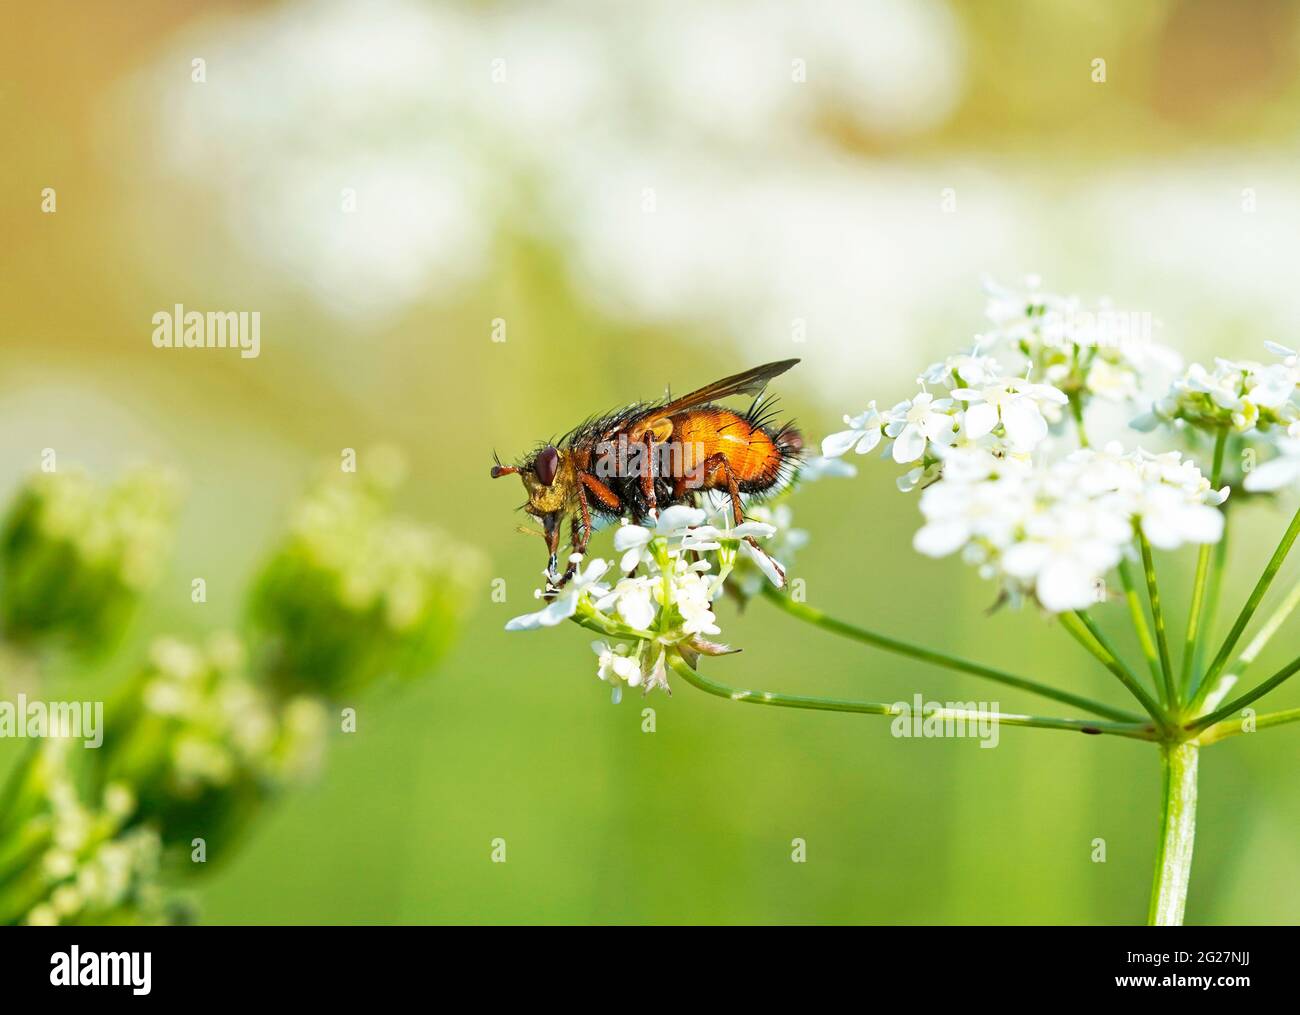 A hedgehog fly, Tachina fera, collects nectar on a flower. Insect close up with green natural background. Stock Photo